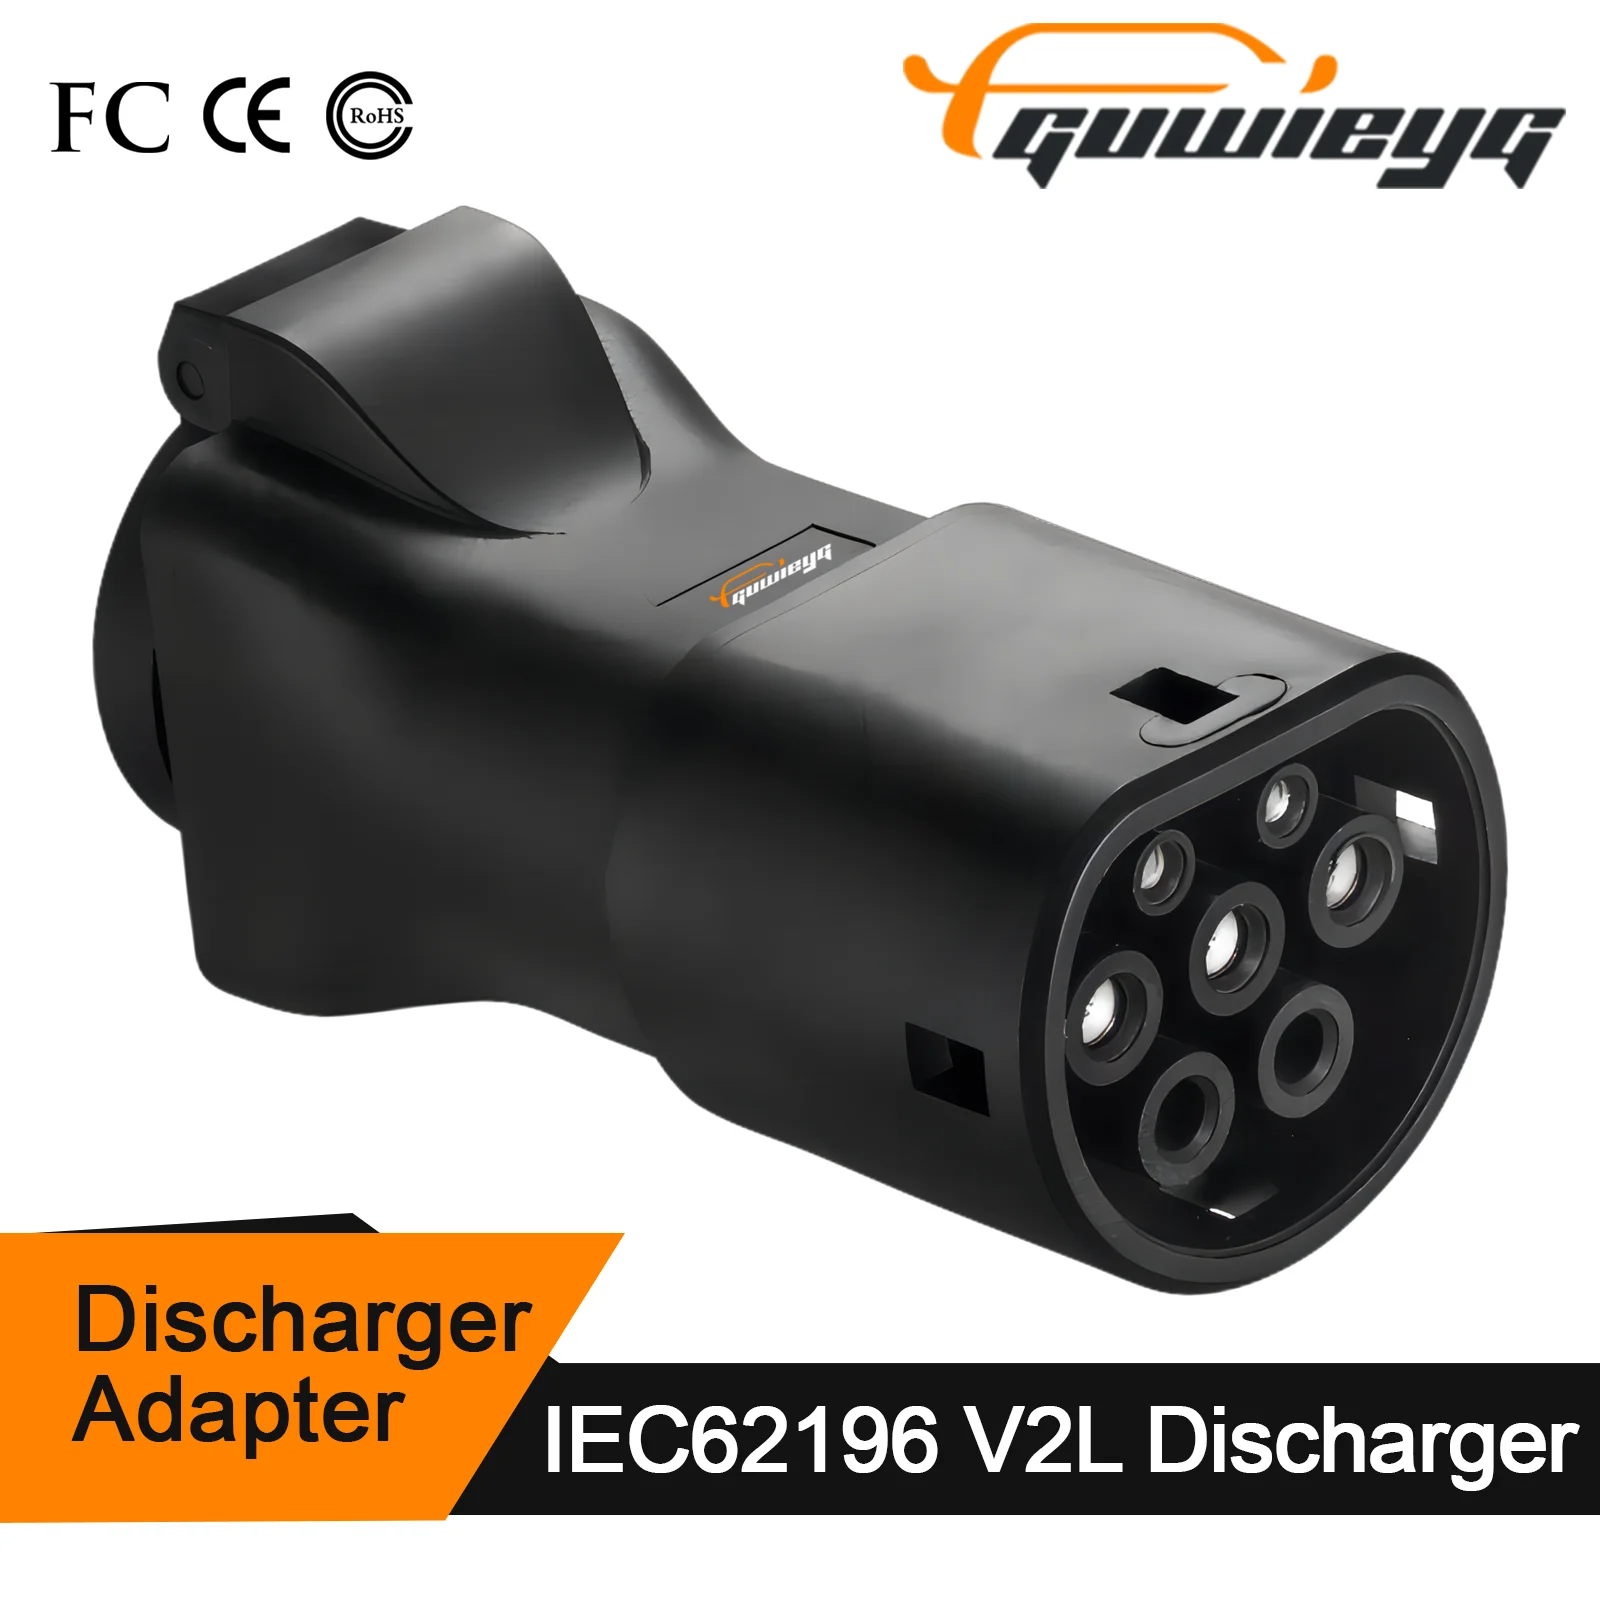 V2L Discharger For Type2 Car Discharge EV Cable Adapter Support MG  Kia Hyundai  Discharge V2L Vehicle to Load Type 2-animated-img